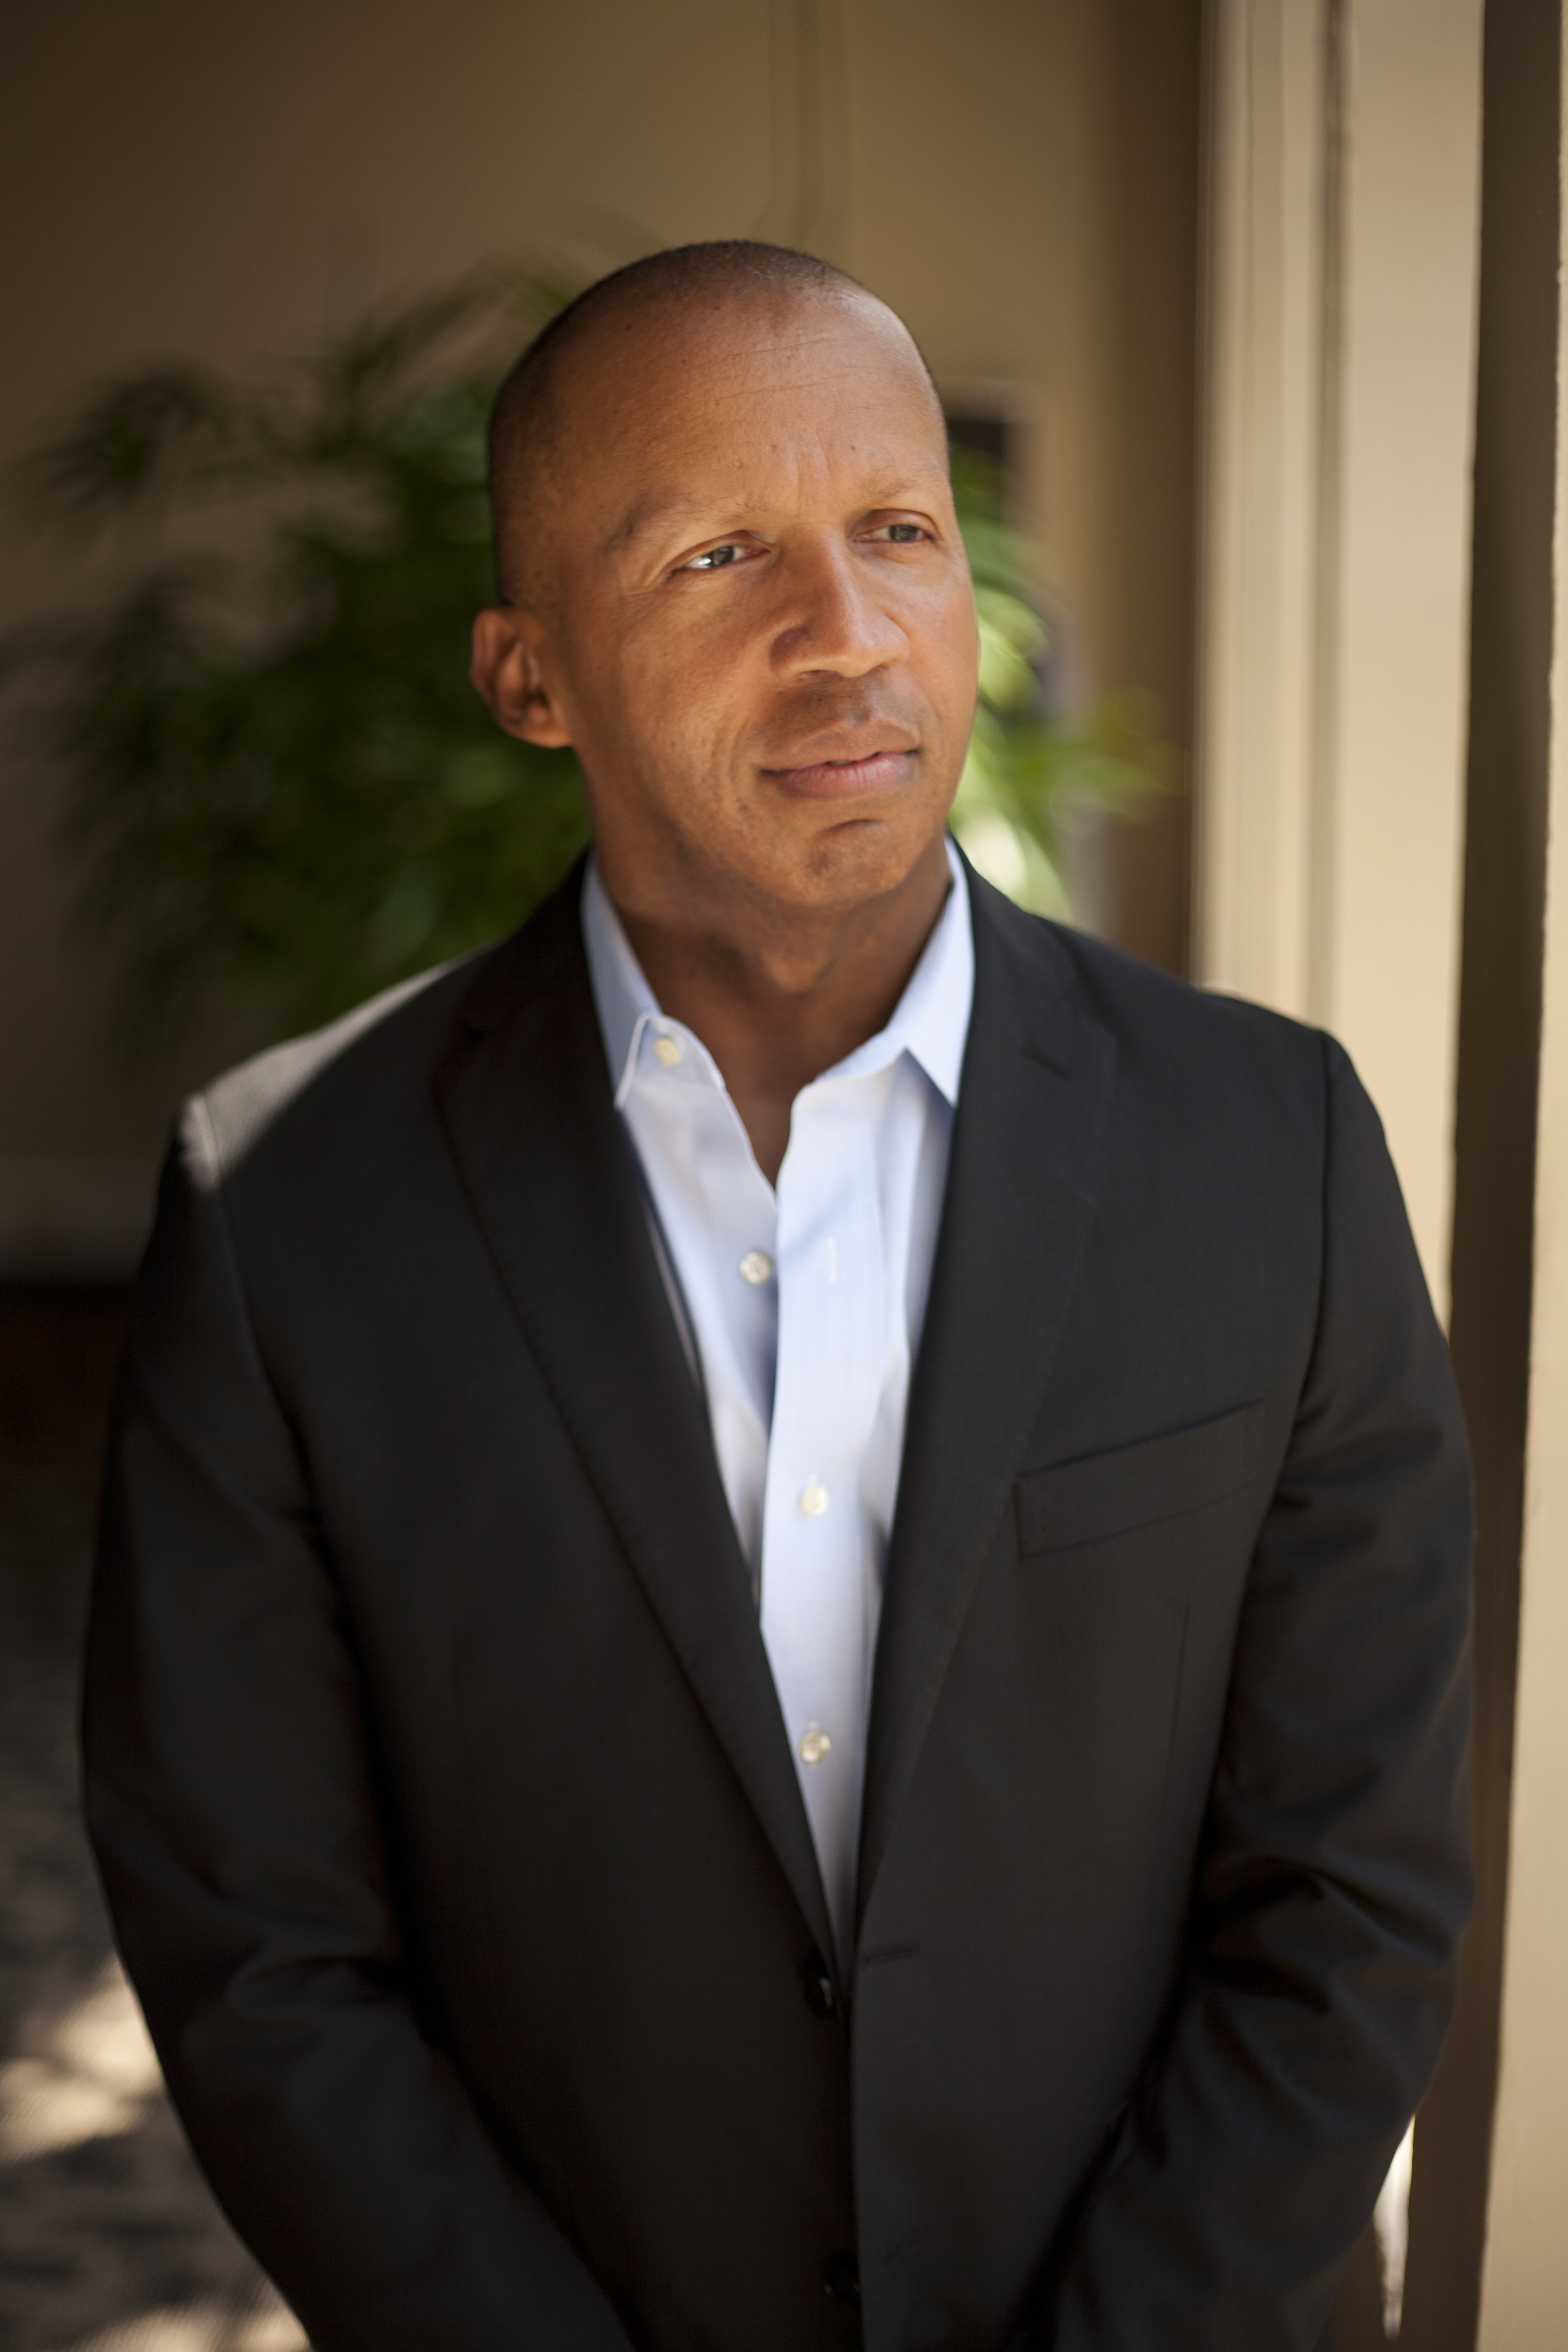 Bryan Stevenson, social justice activist and founder and executive director of the Equal Justice Initiative (EJI), will deliver the keynote address during Howard University’s 153rd Commencement Ceremony on Saturday, May 8, 2021.  